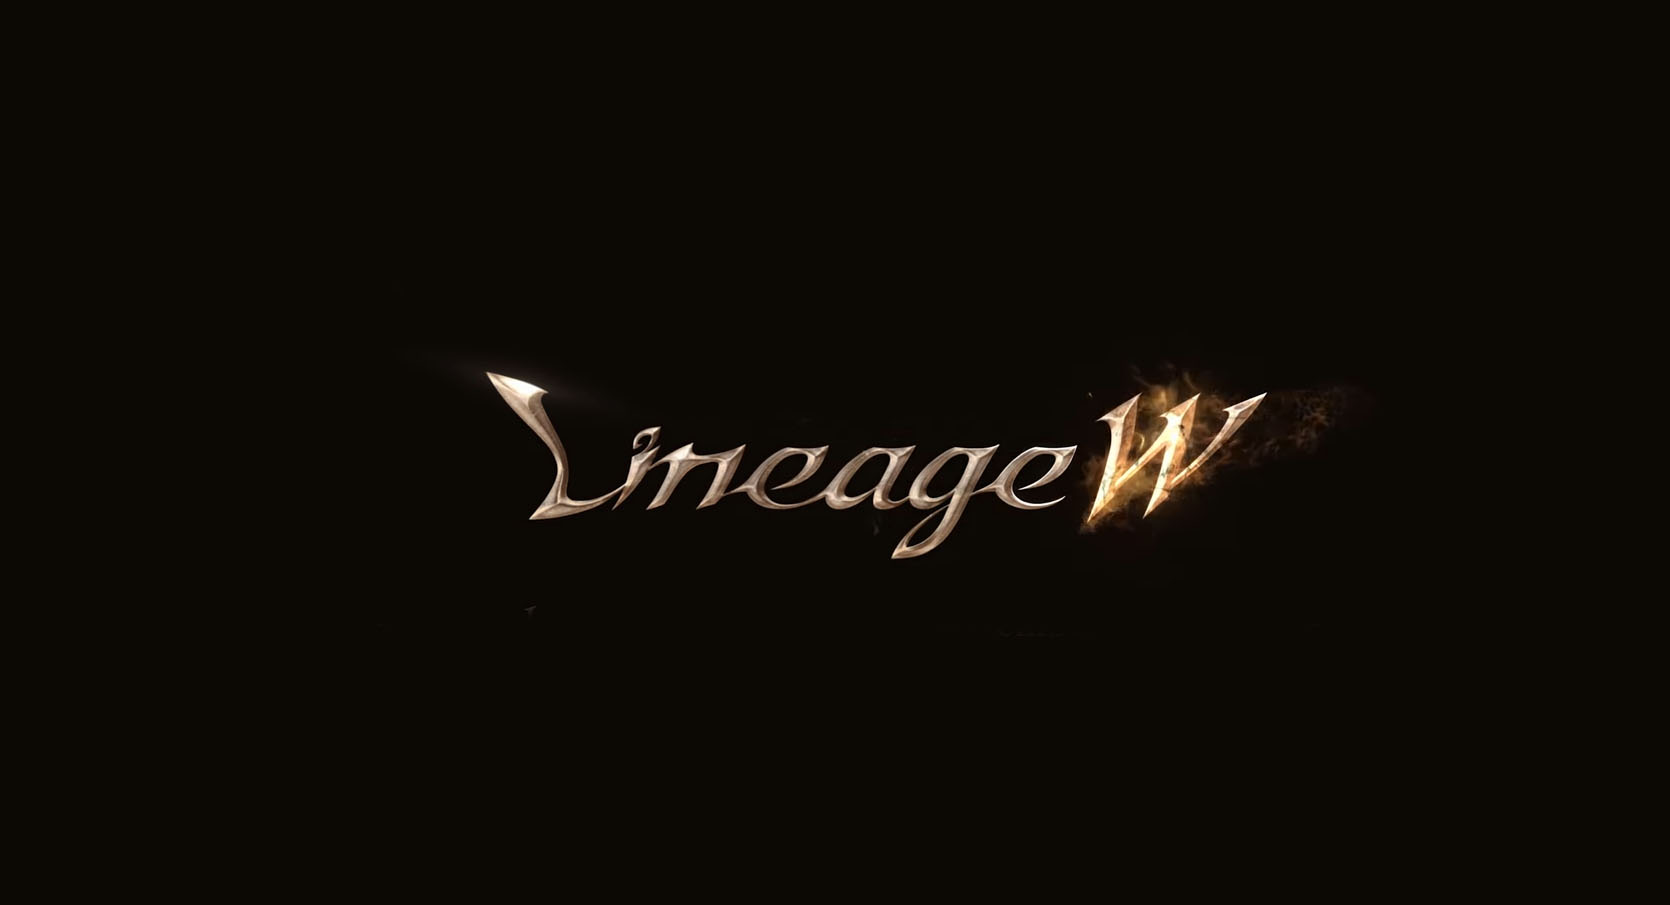 Download Lineage W Android free game.